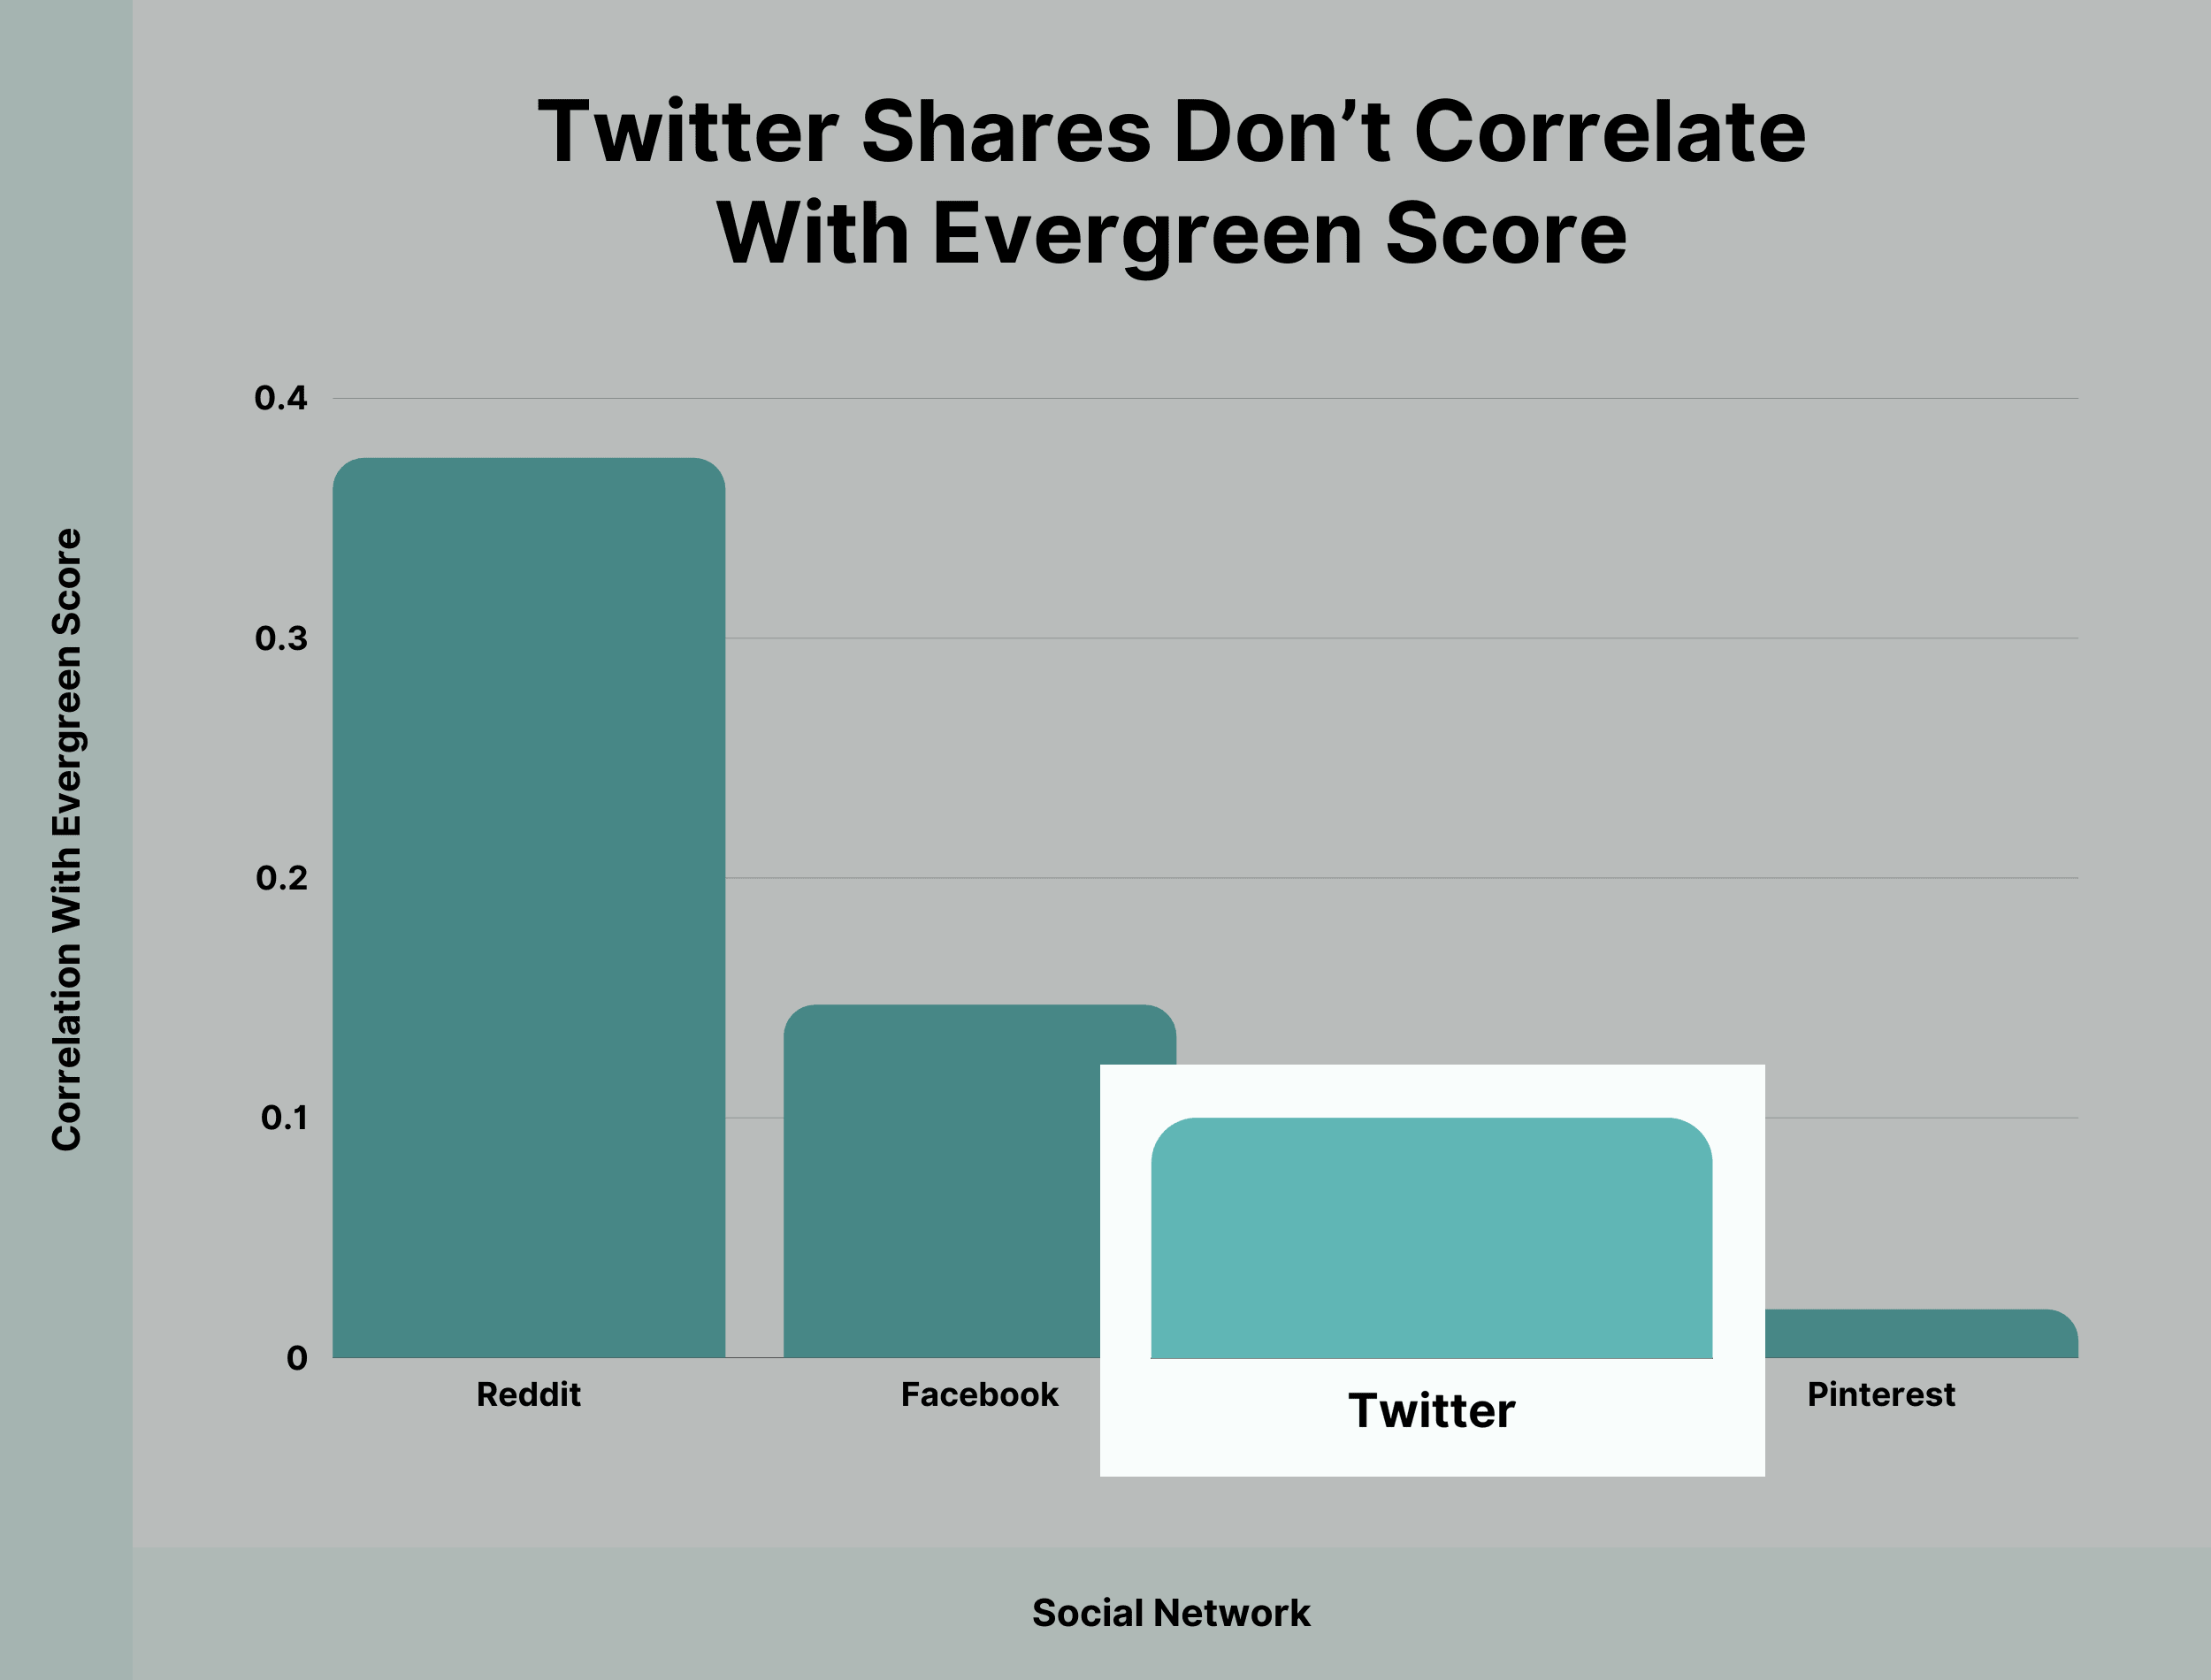 Twitter shares don't correlate with evergreen score